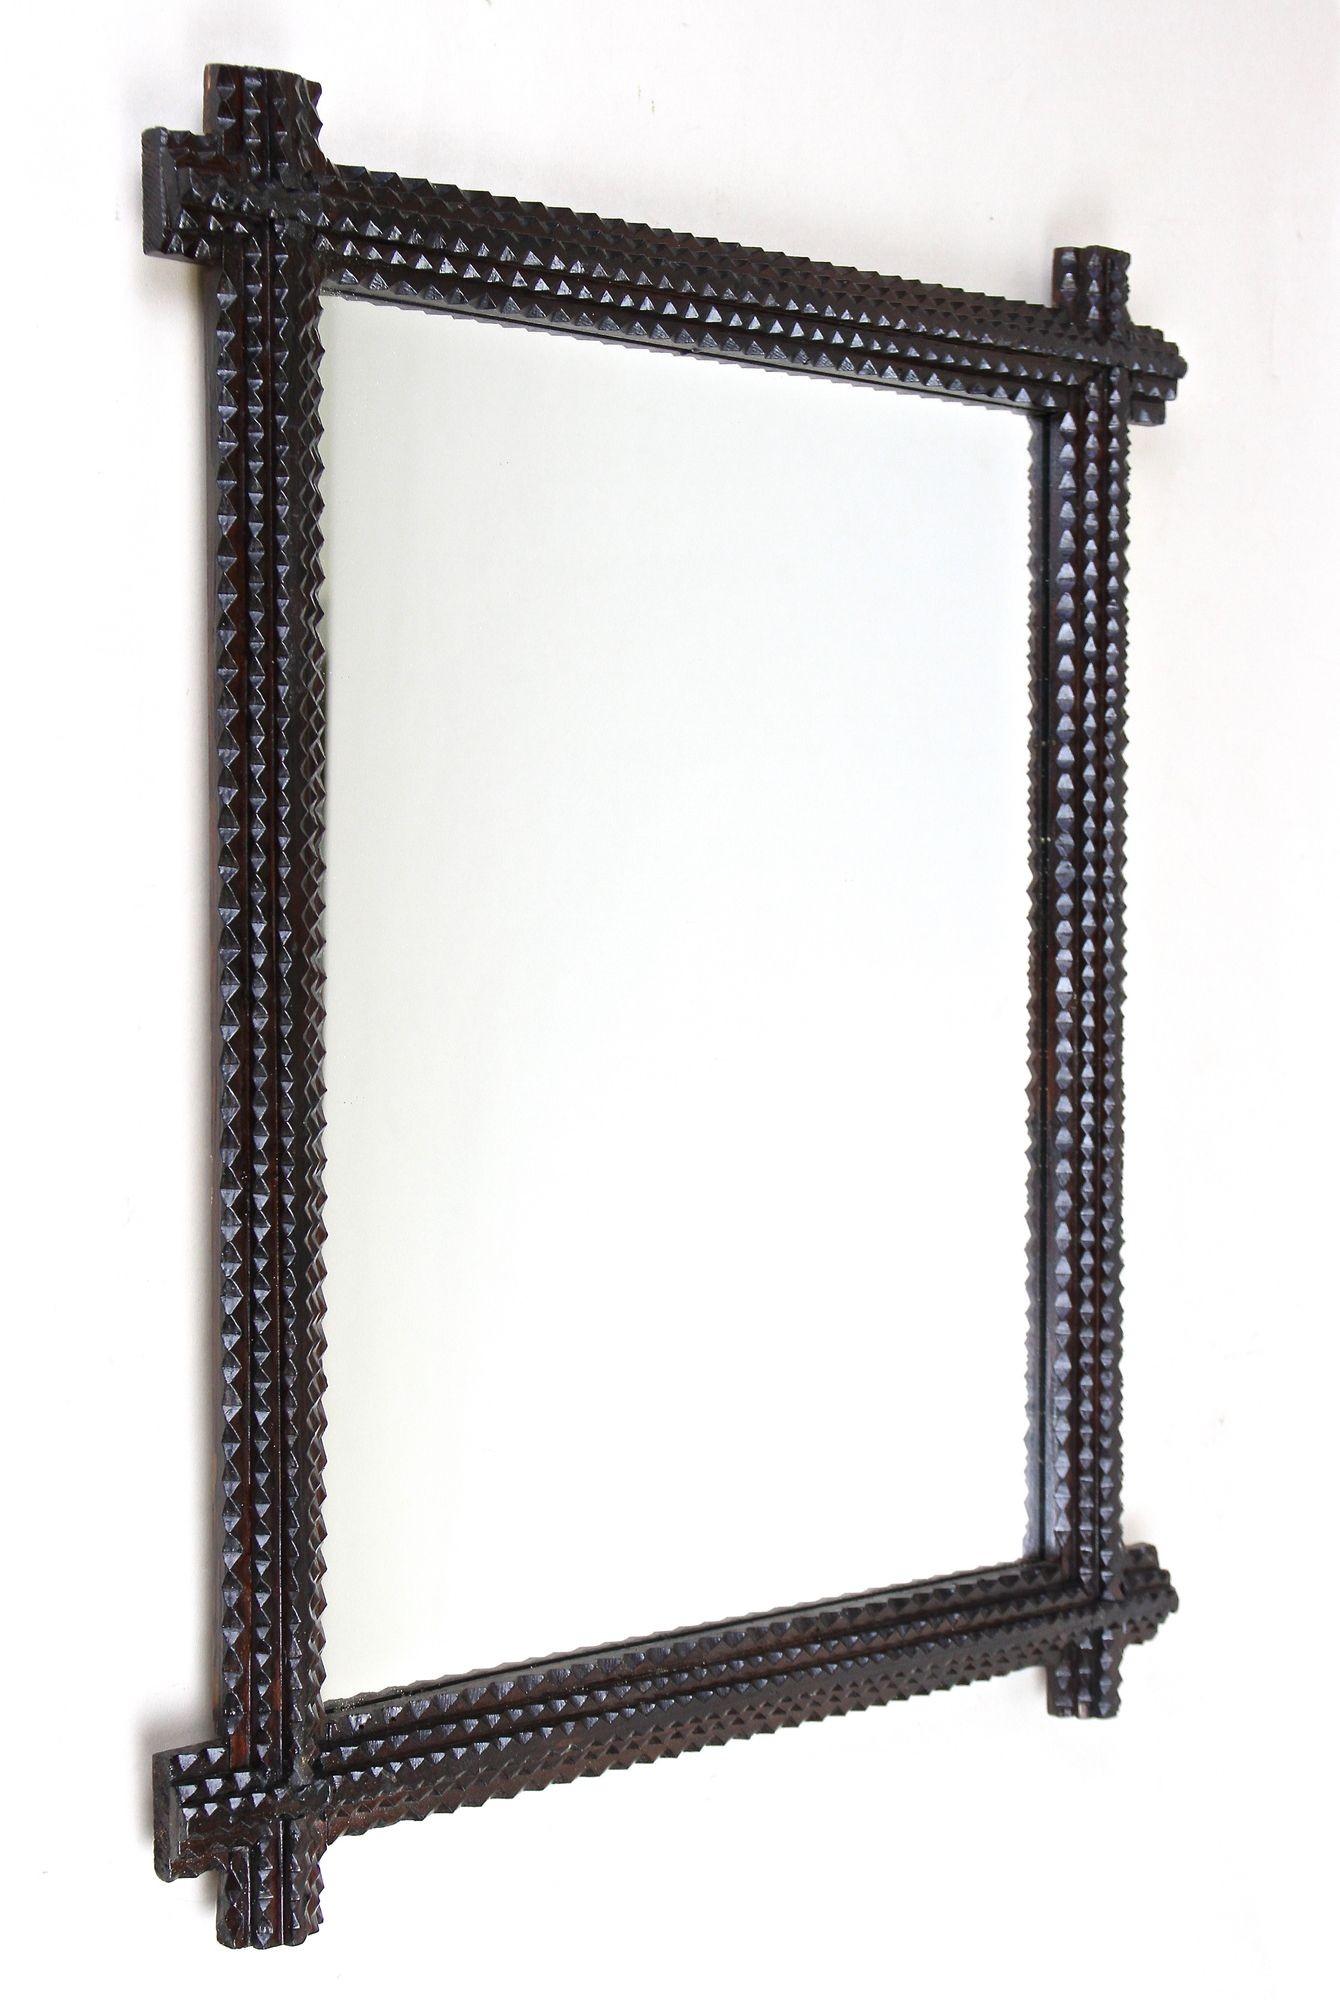 Lovely rustic Tramp Art wall mirror from the late 19th century in Austria around 1880. Elaborately hand carved out of basswood this over 140 year old Tramp Art mirror comes with a very dark brown, almost black looking surface sealed with a nice semi